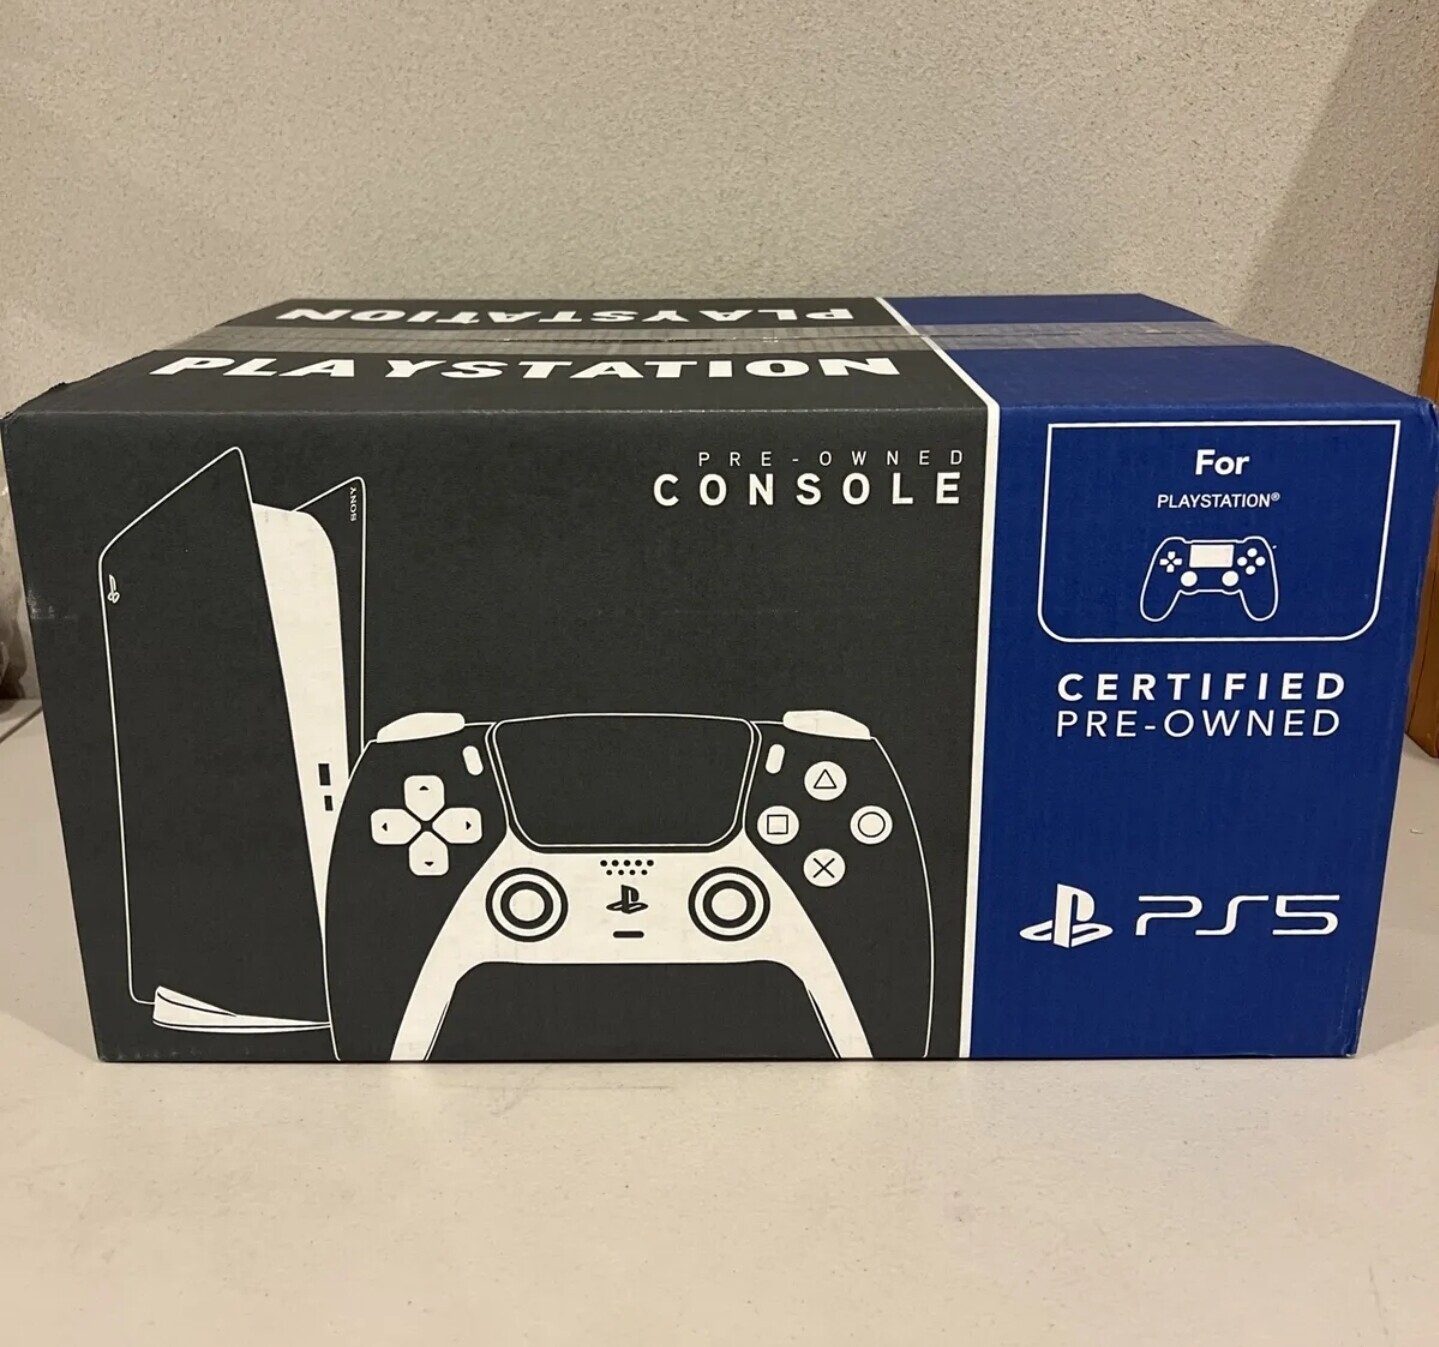  Sony Playstation 5 Digital GameStop Certified Pre-Owned Console